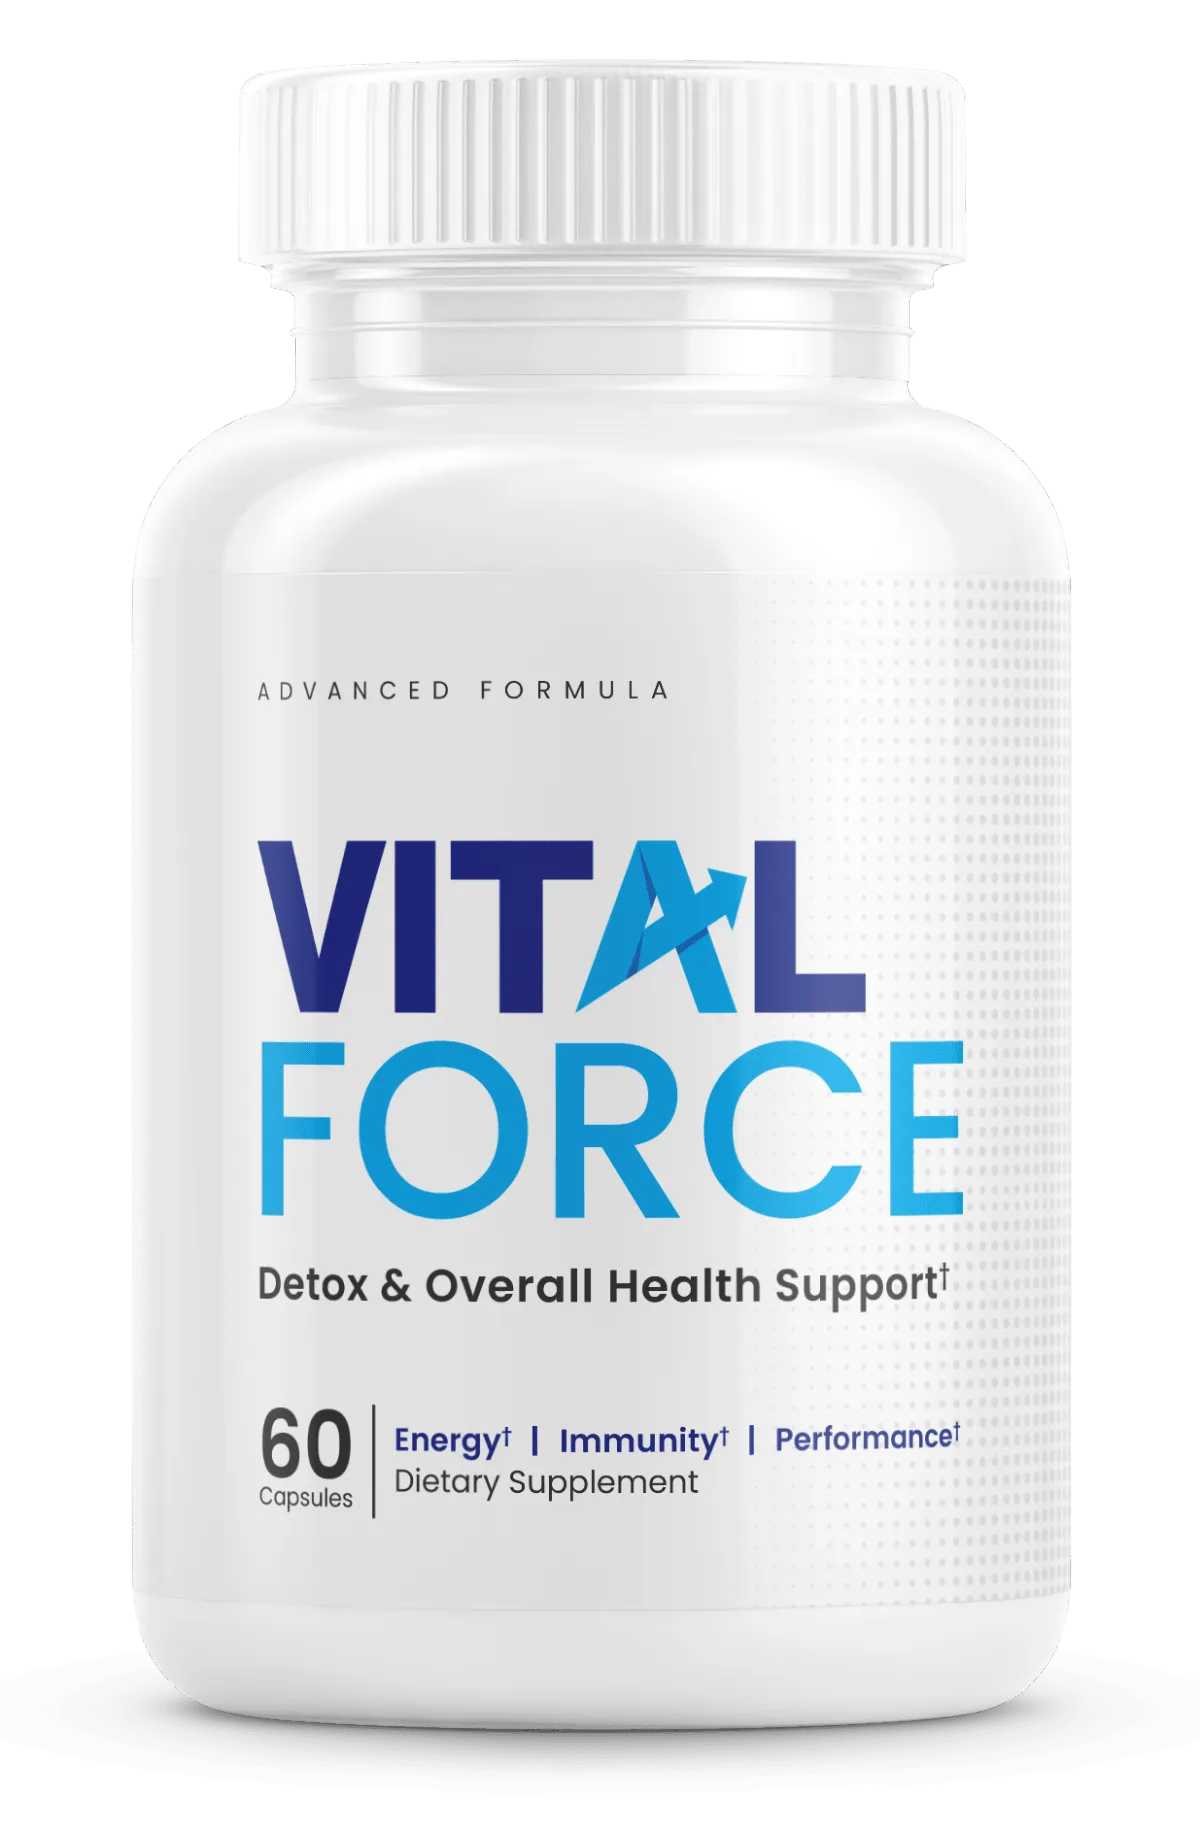 "Natural Immune Support Supplements"